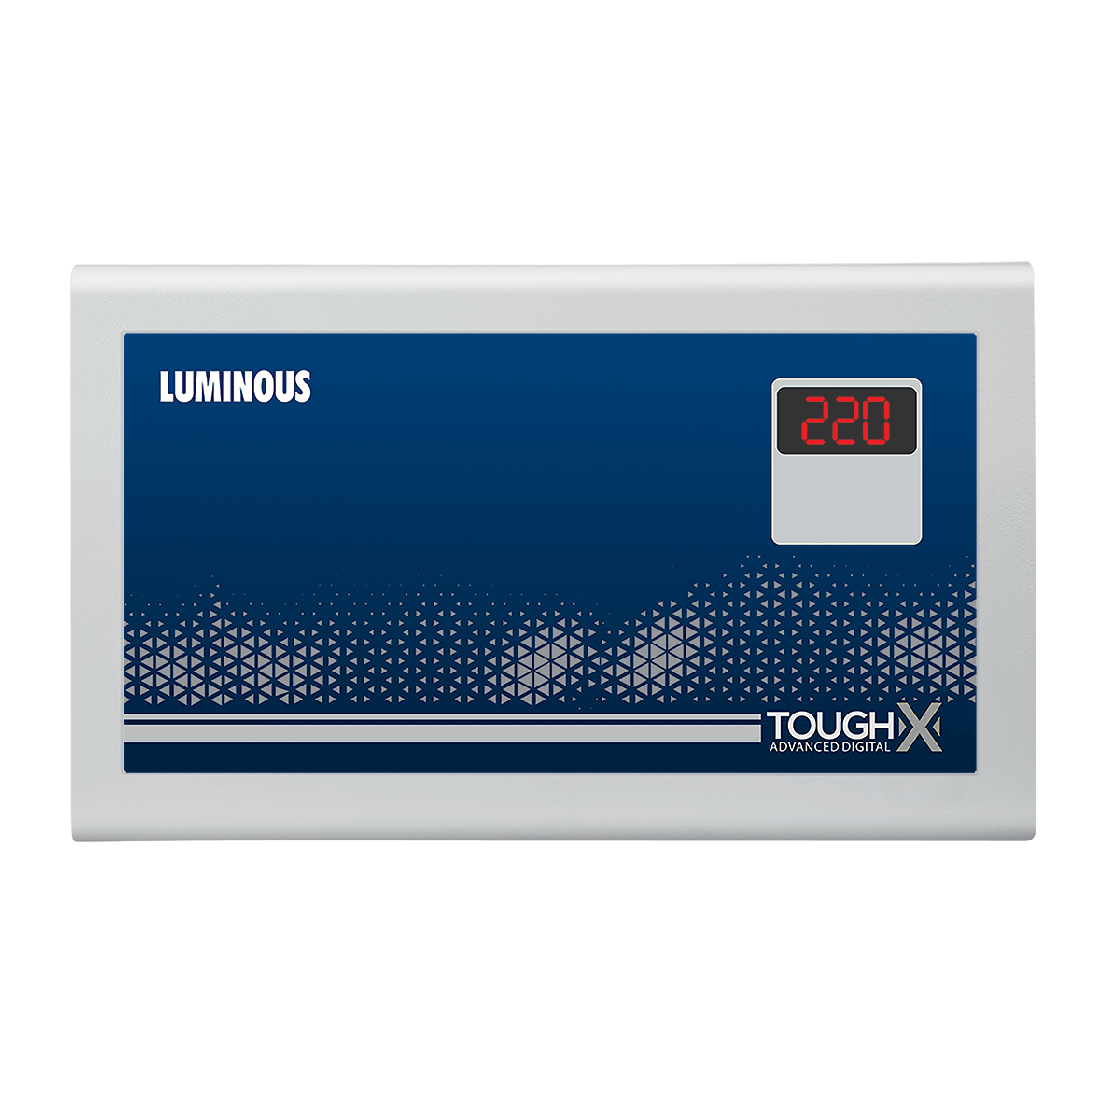 Want to buy a good voltage stabilizer online? Luminous is here to serve you!